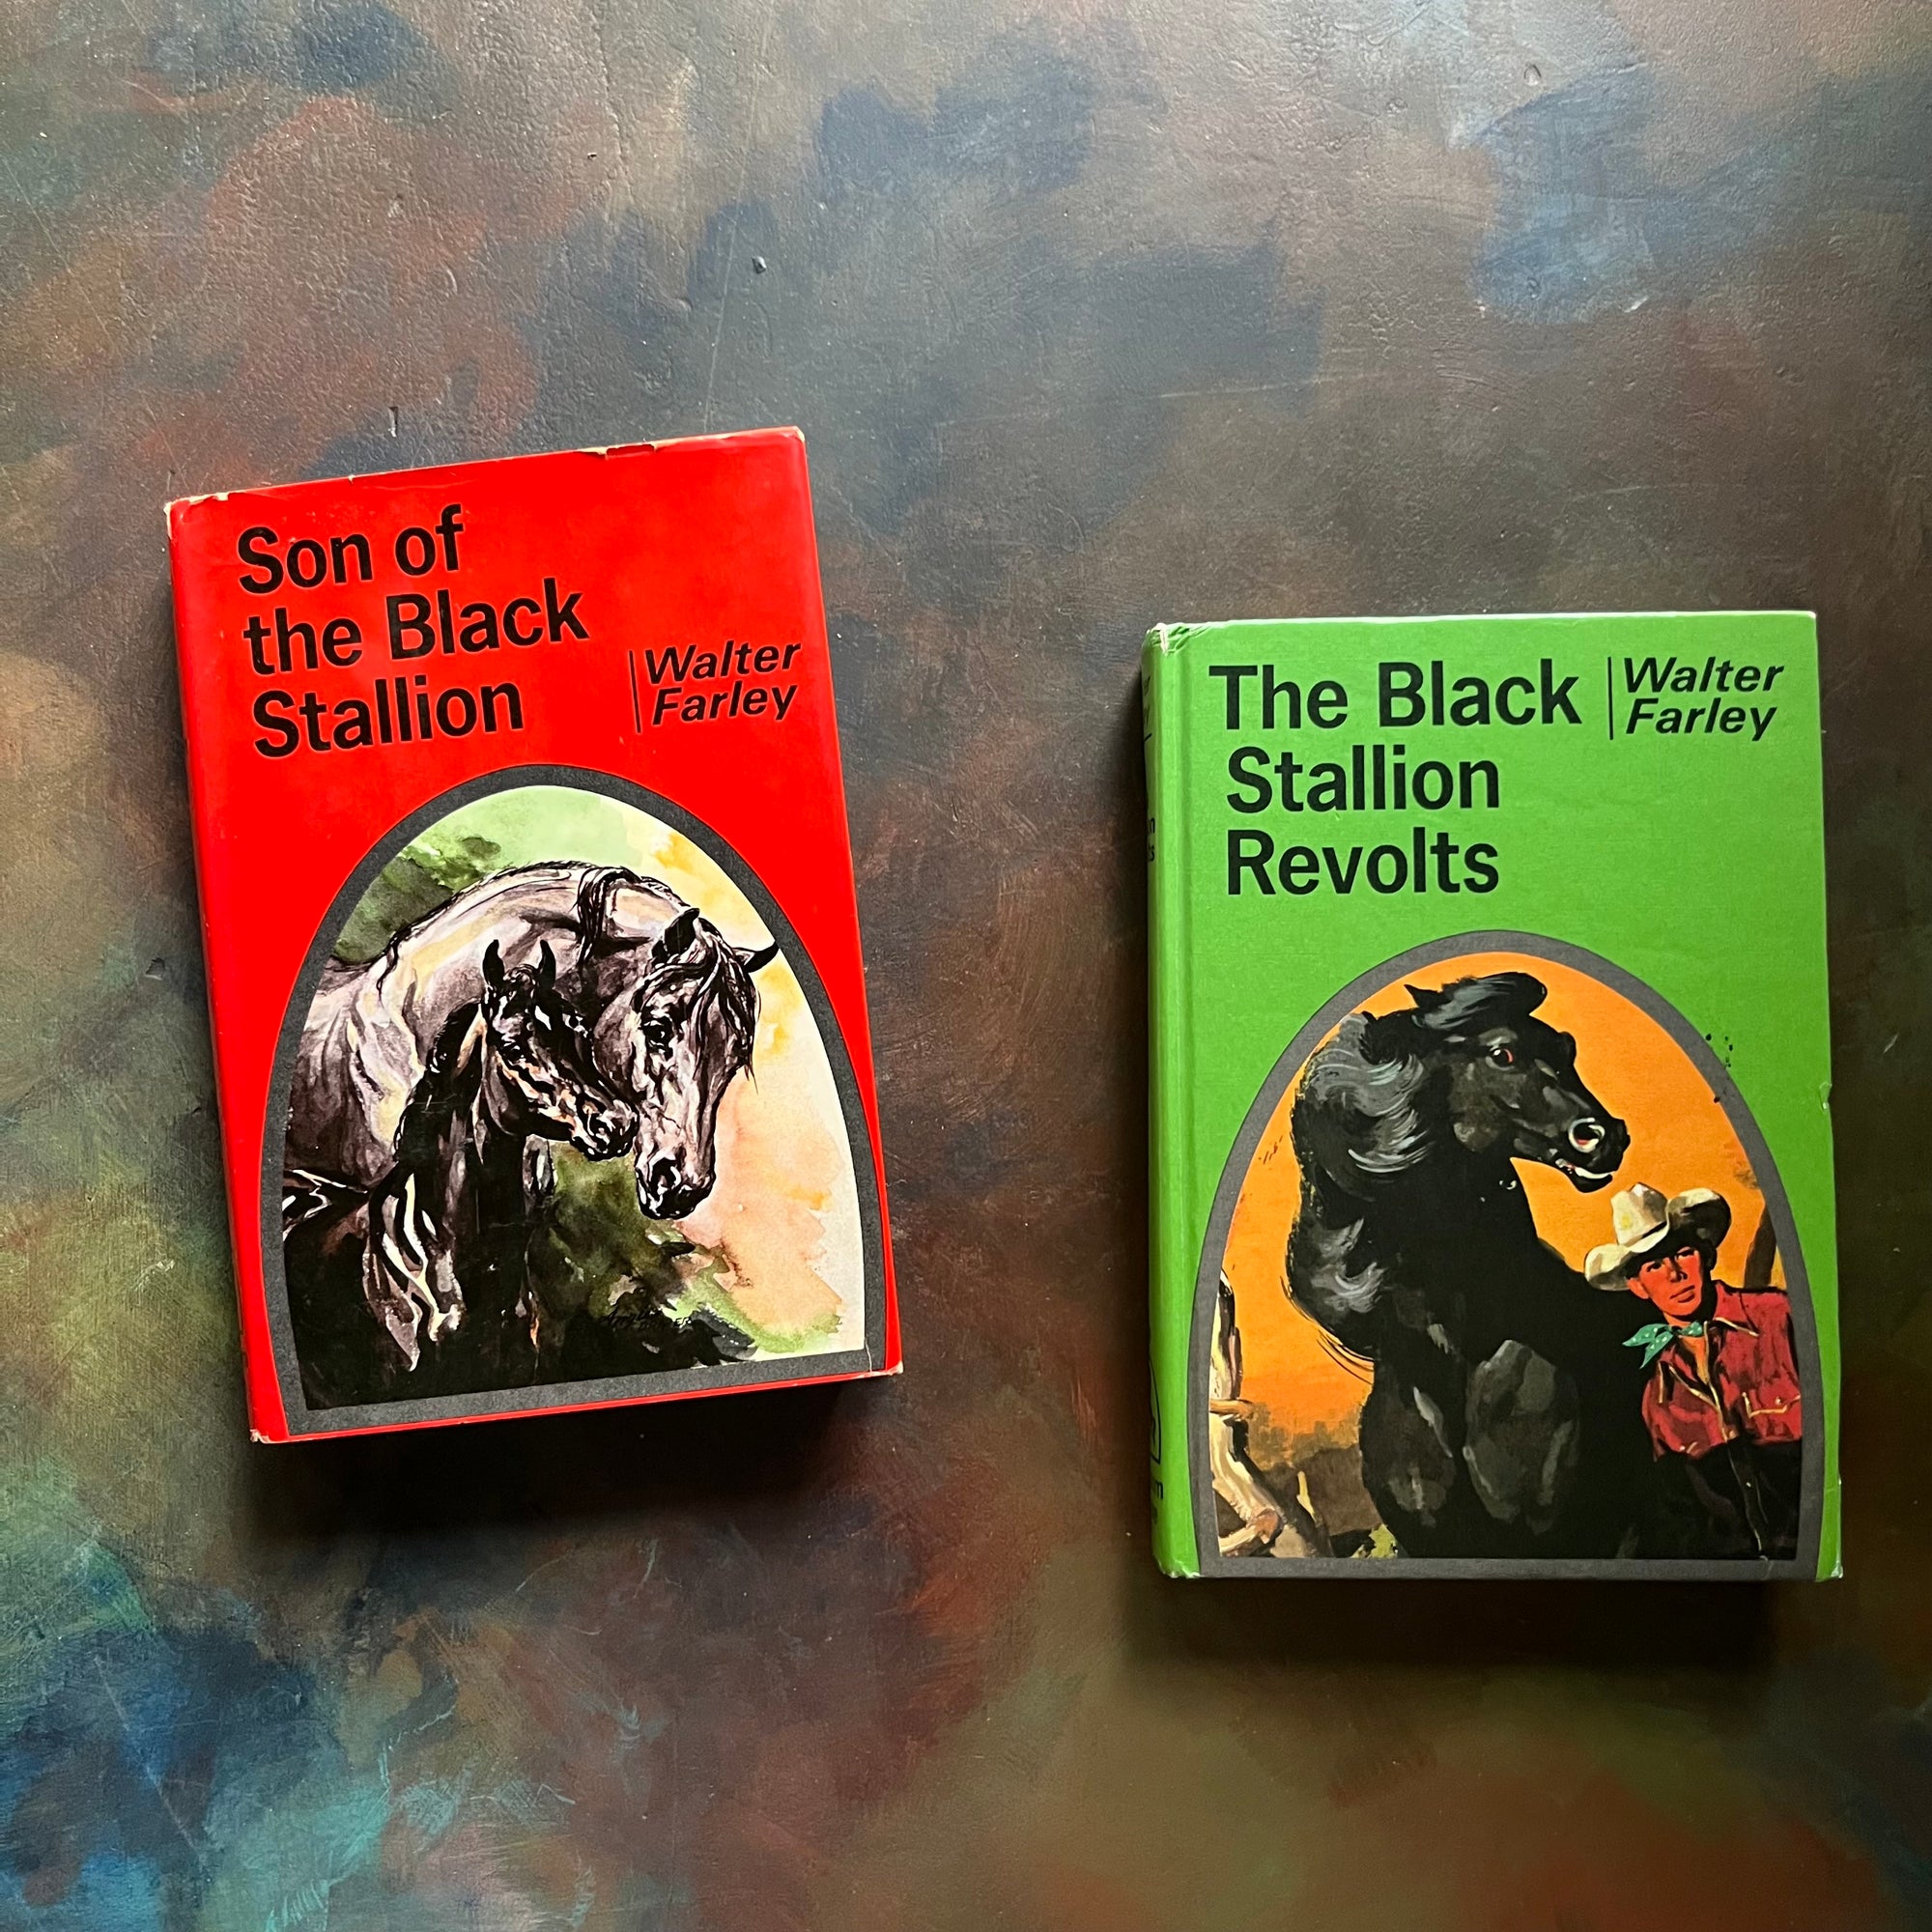 Pair of The Black Stallion Books written by Walter Farley-Son of The Black Stallion-The Black Stallion Revolts-vintage adventure horse books-view of the front cover with dust jacket on Son of the Black Stallion